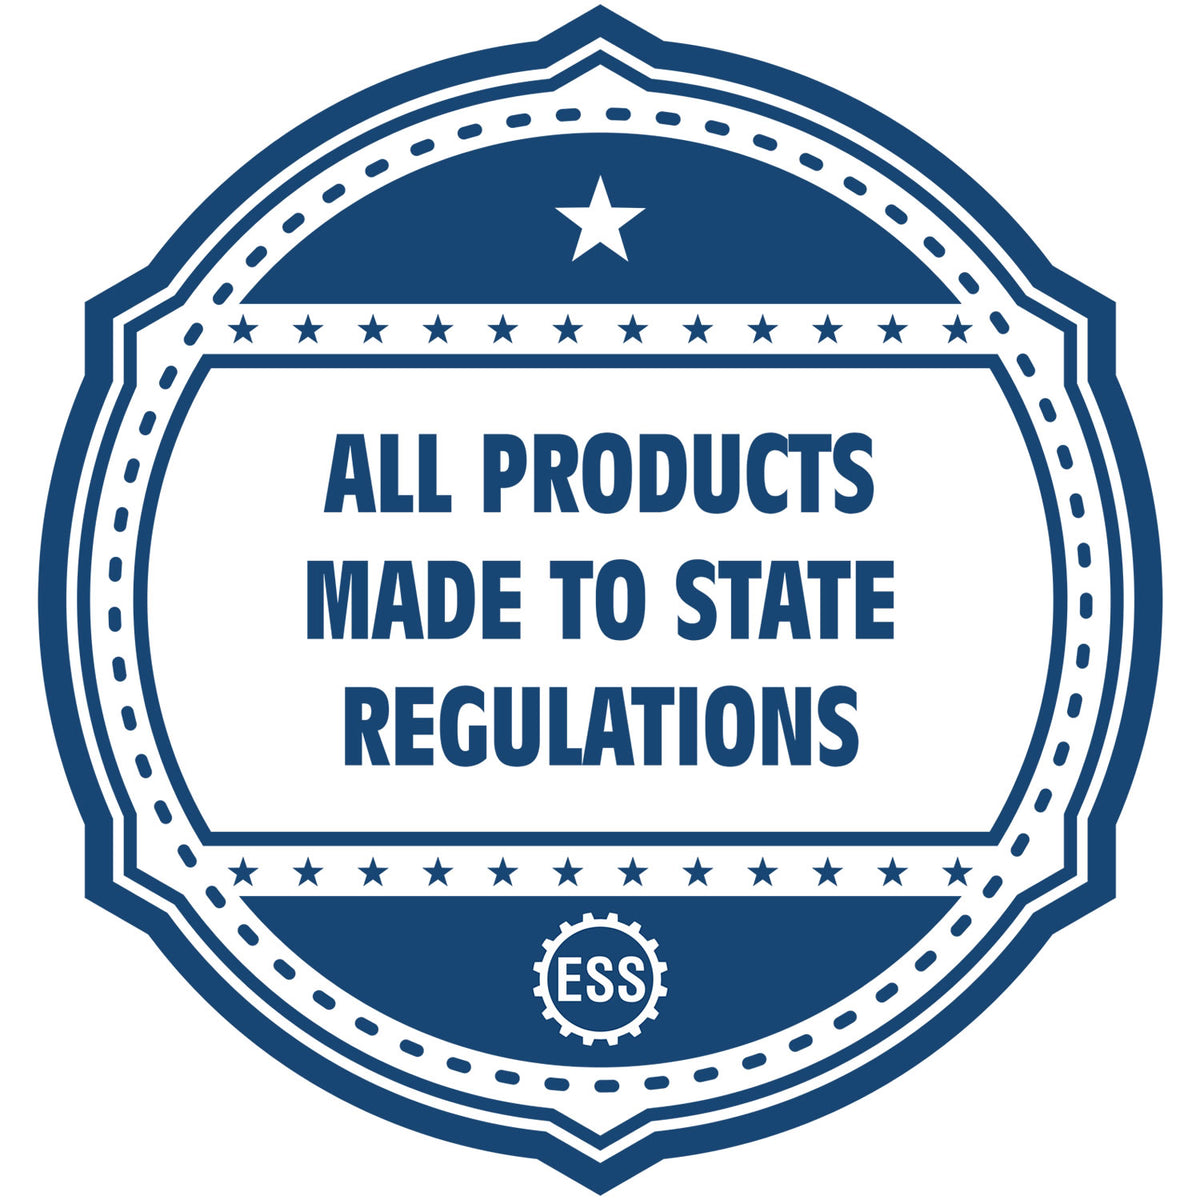 An icon or badge element for the District of Columbia Architectural Seal Embosser showing that this product is made in compliance with state regulations.